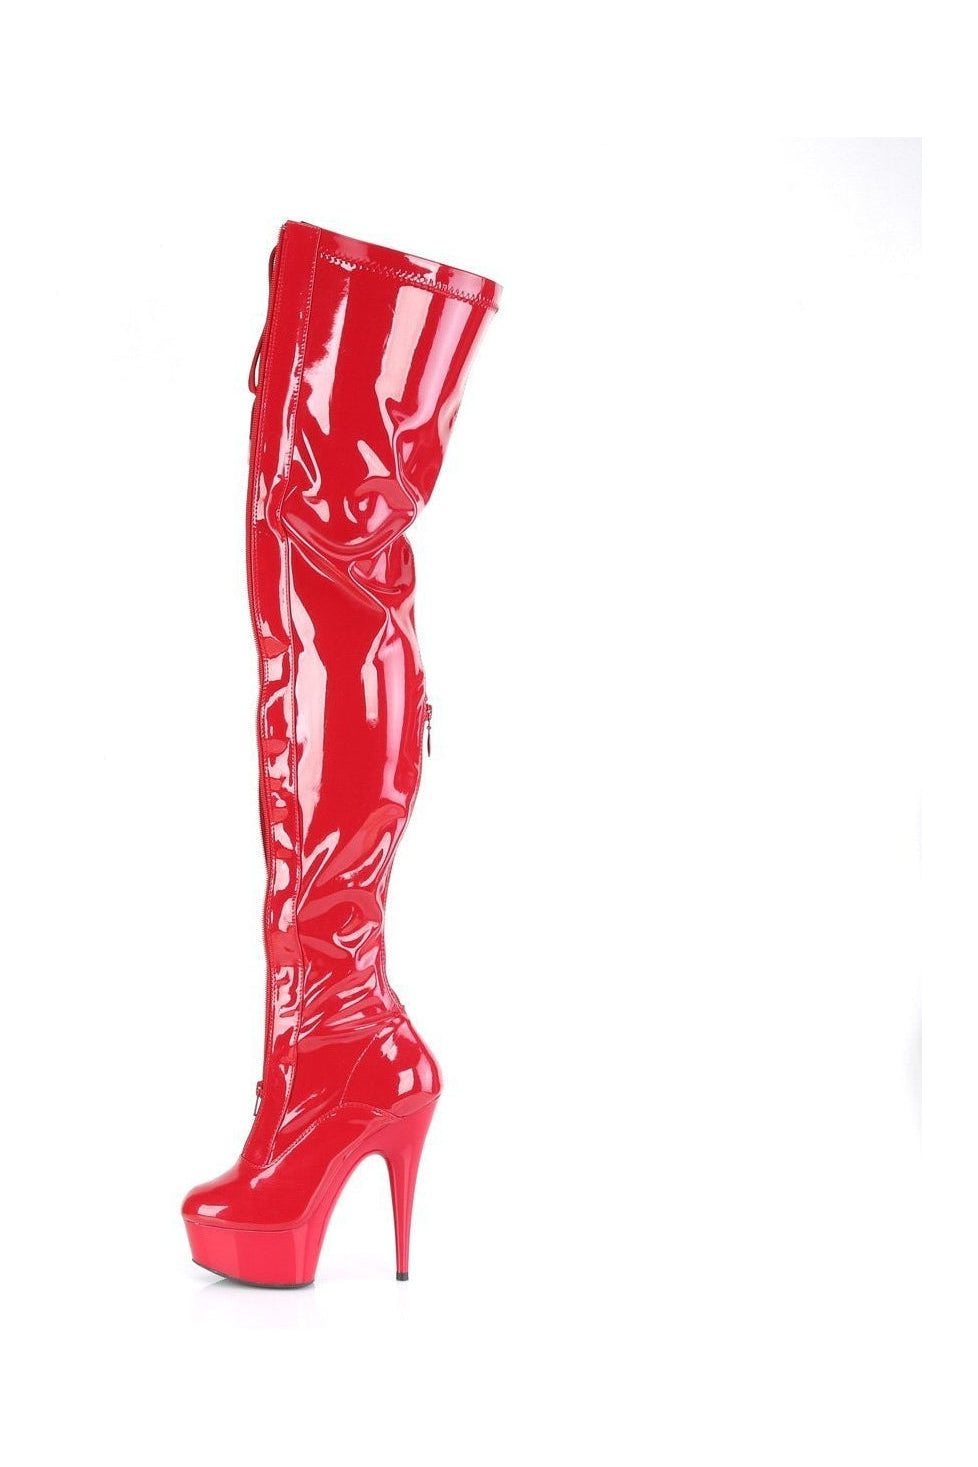 DELIGHT-3027 Thigh Boot | Red Patent-Thigh Boots-Pleaser-SEXYSHOES.COM